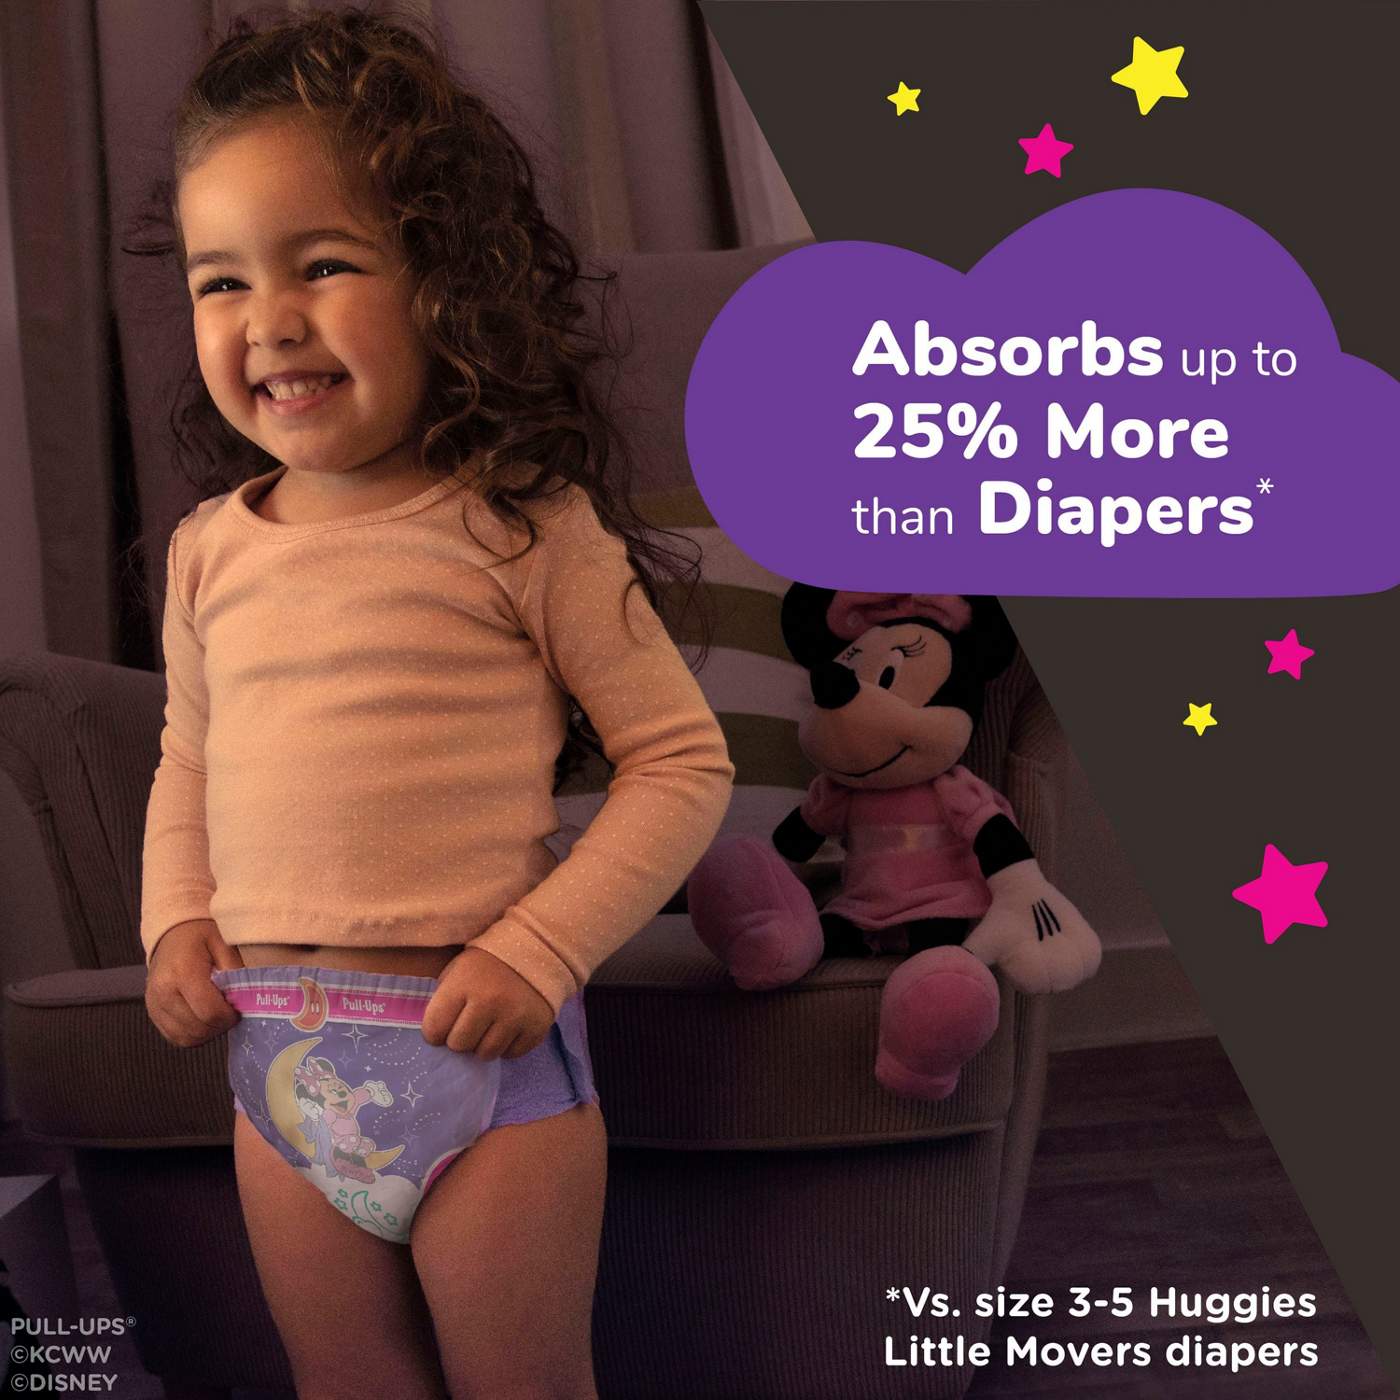 Pull-Ups® Potty Training Pants For Girls